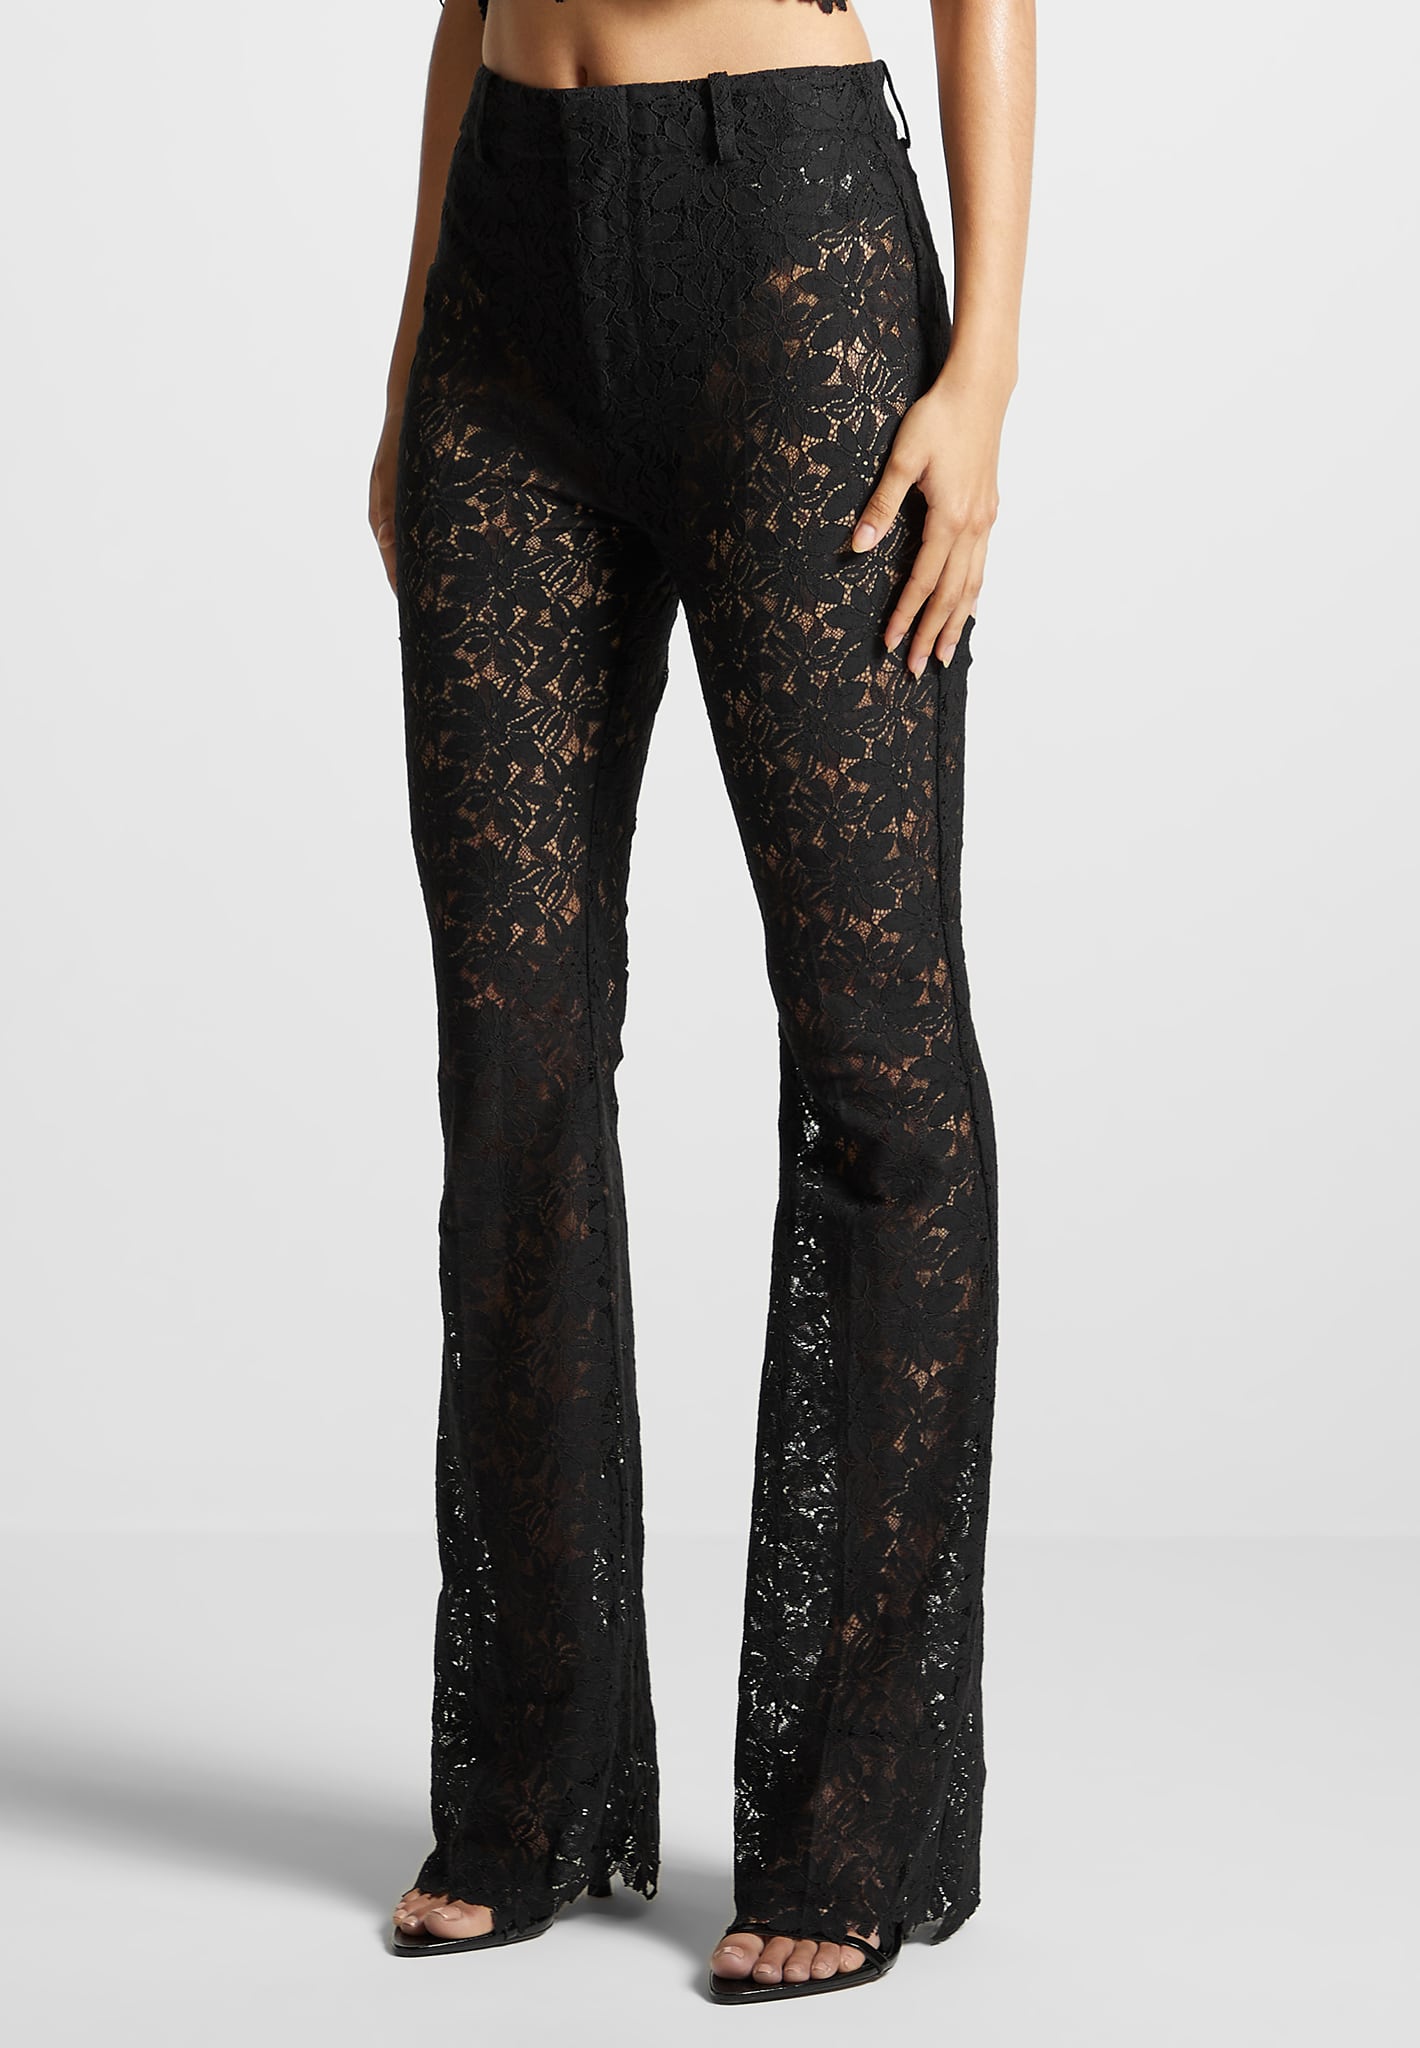 https://us.manieredevoir.com/cdn/shop/files/Lace-Fit-and-Flare-Trousers-Black4.jpg?v=1703157215